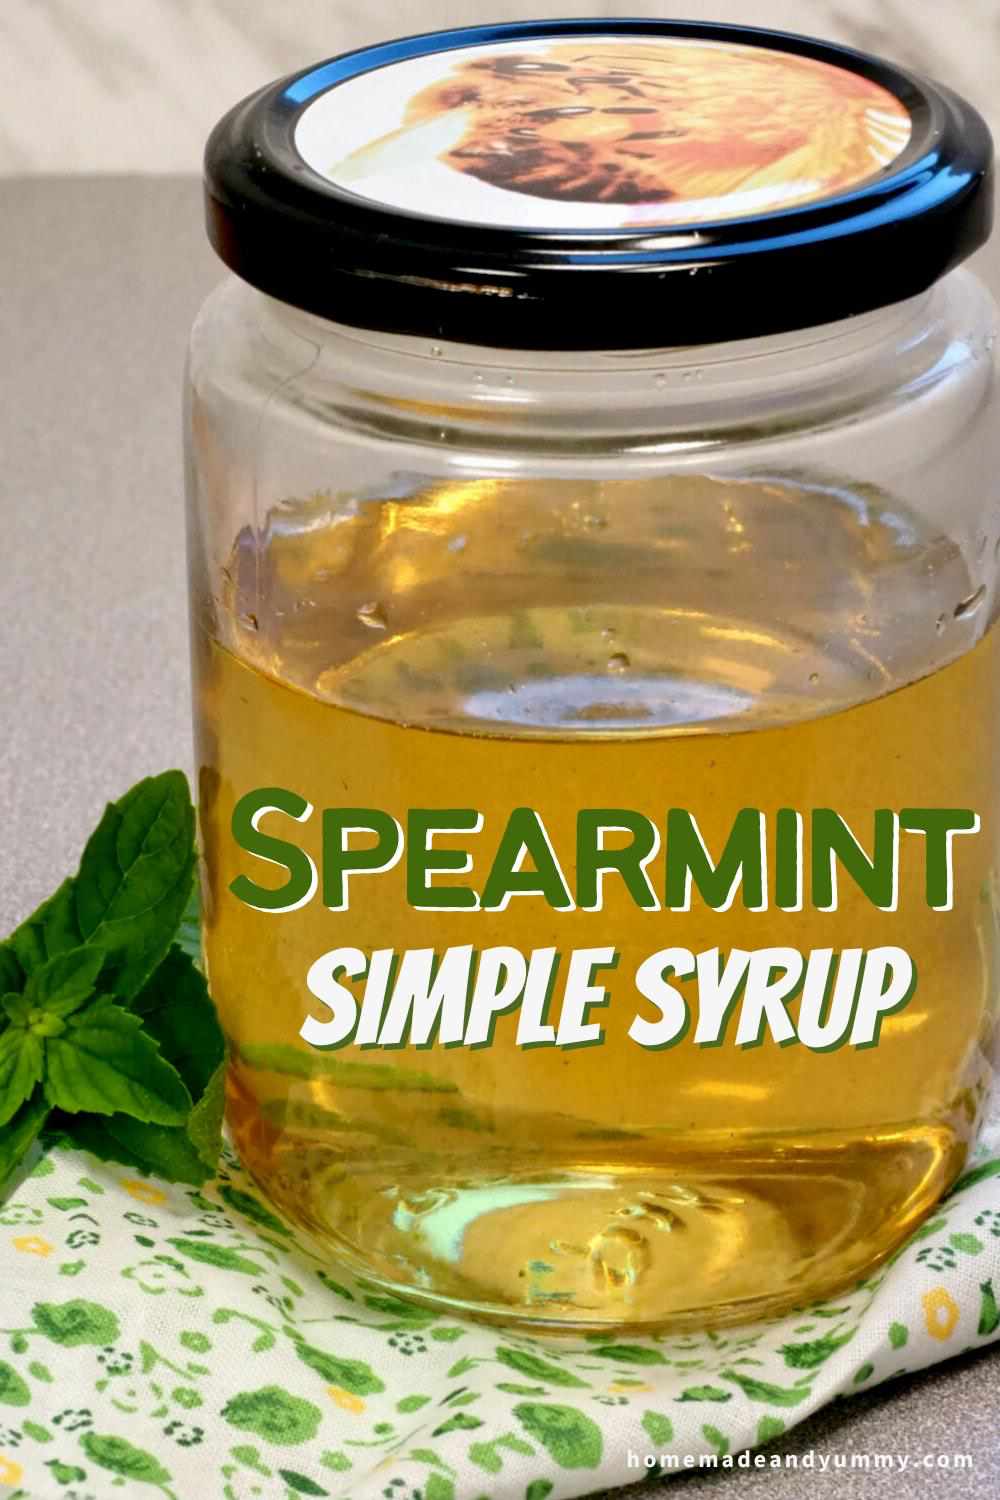 Spearmint Simple Syrup